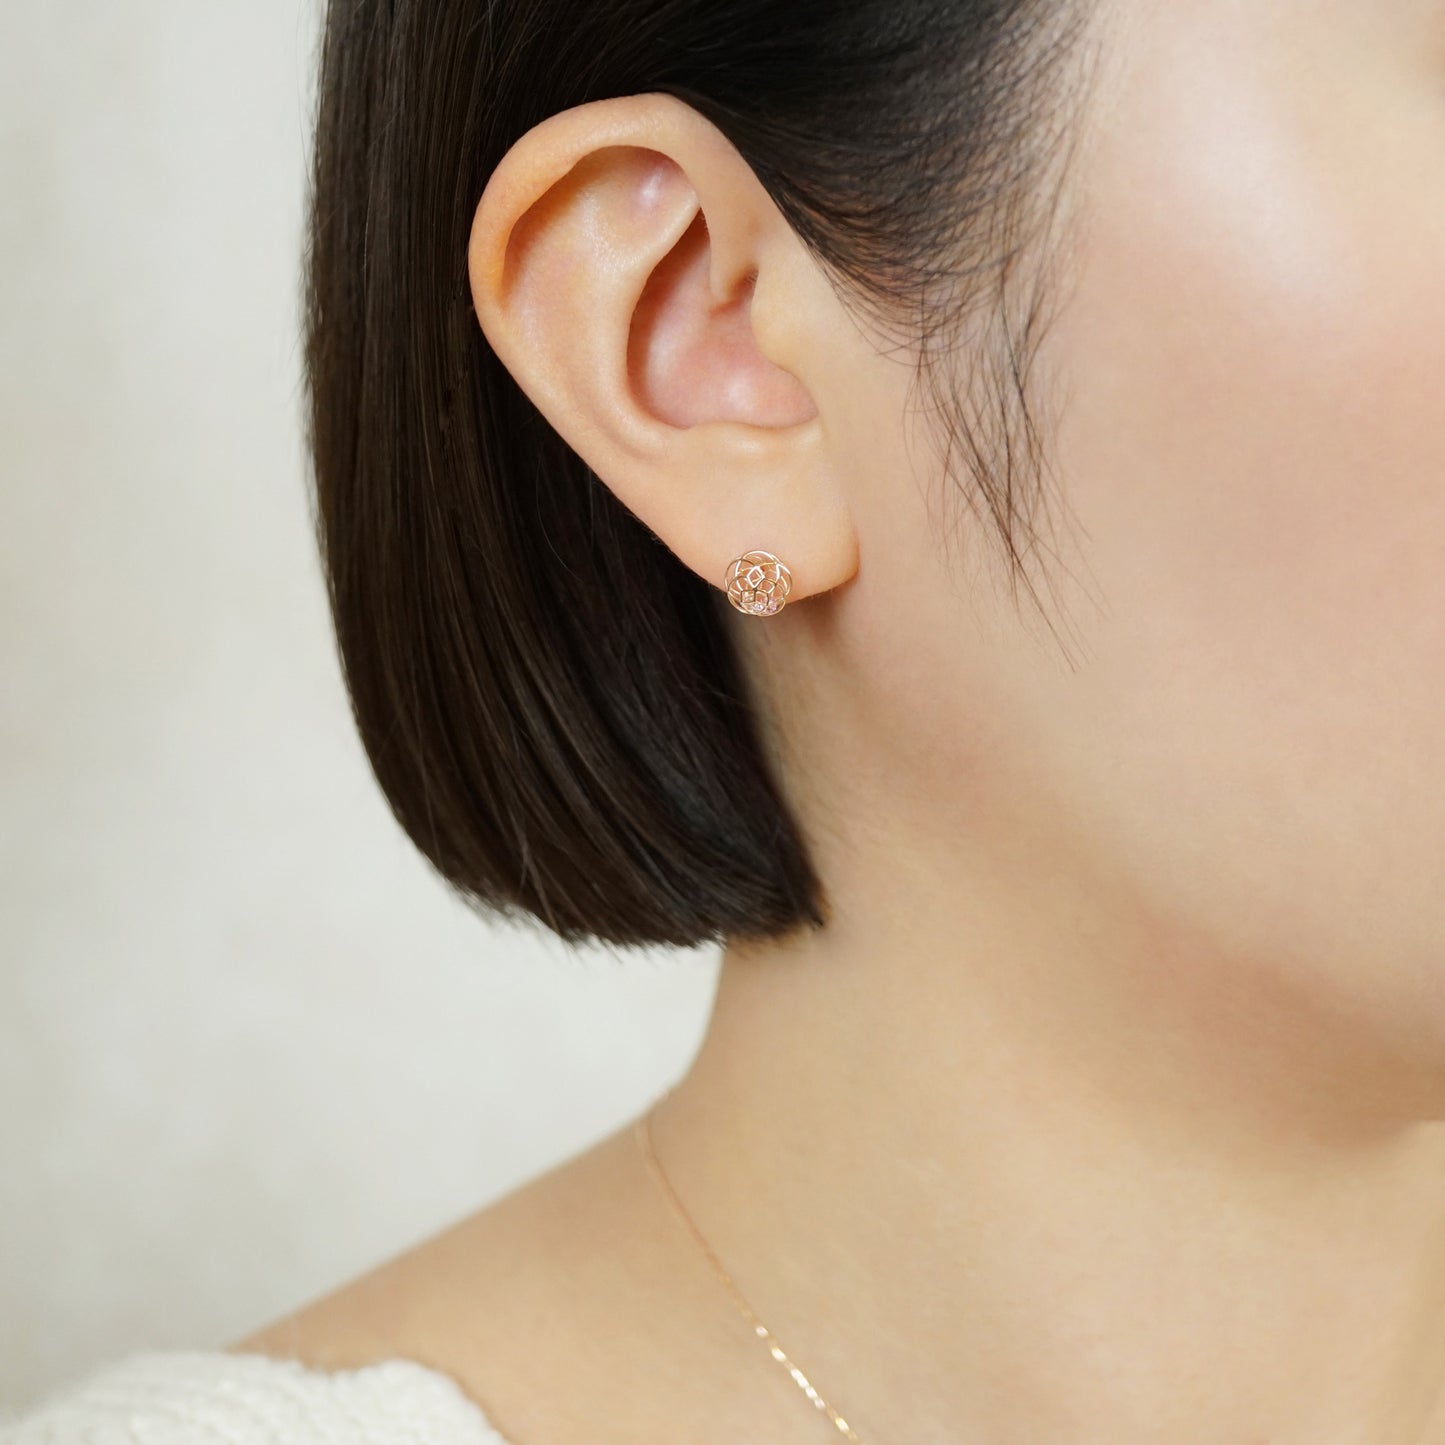 [Pannier] 18K/10K Limited Quantity Earrings “Cherry Blossoms” (Rose Gold) - Model Image